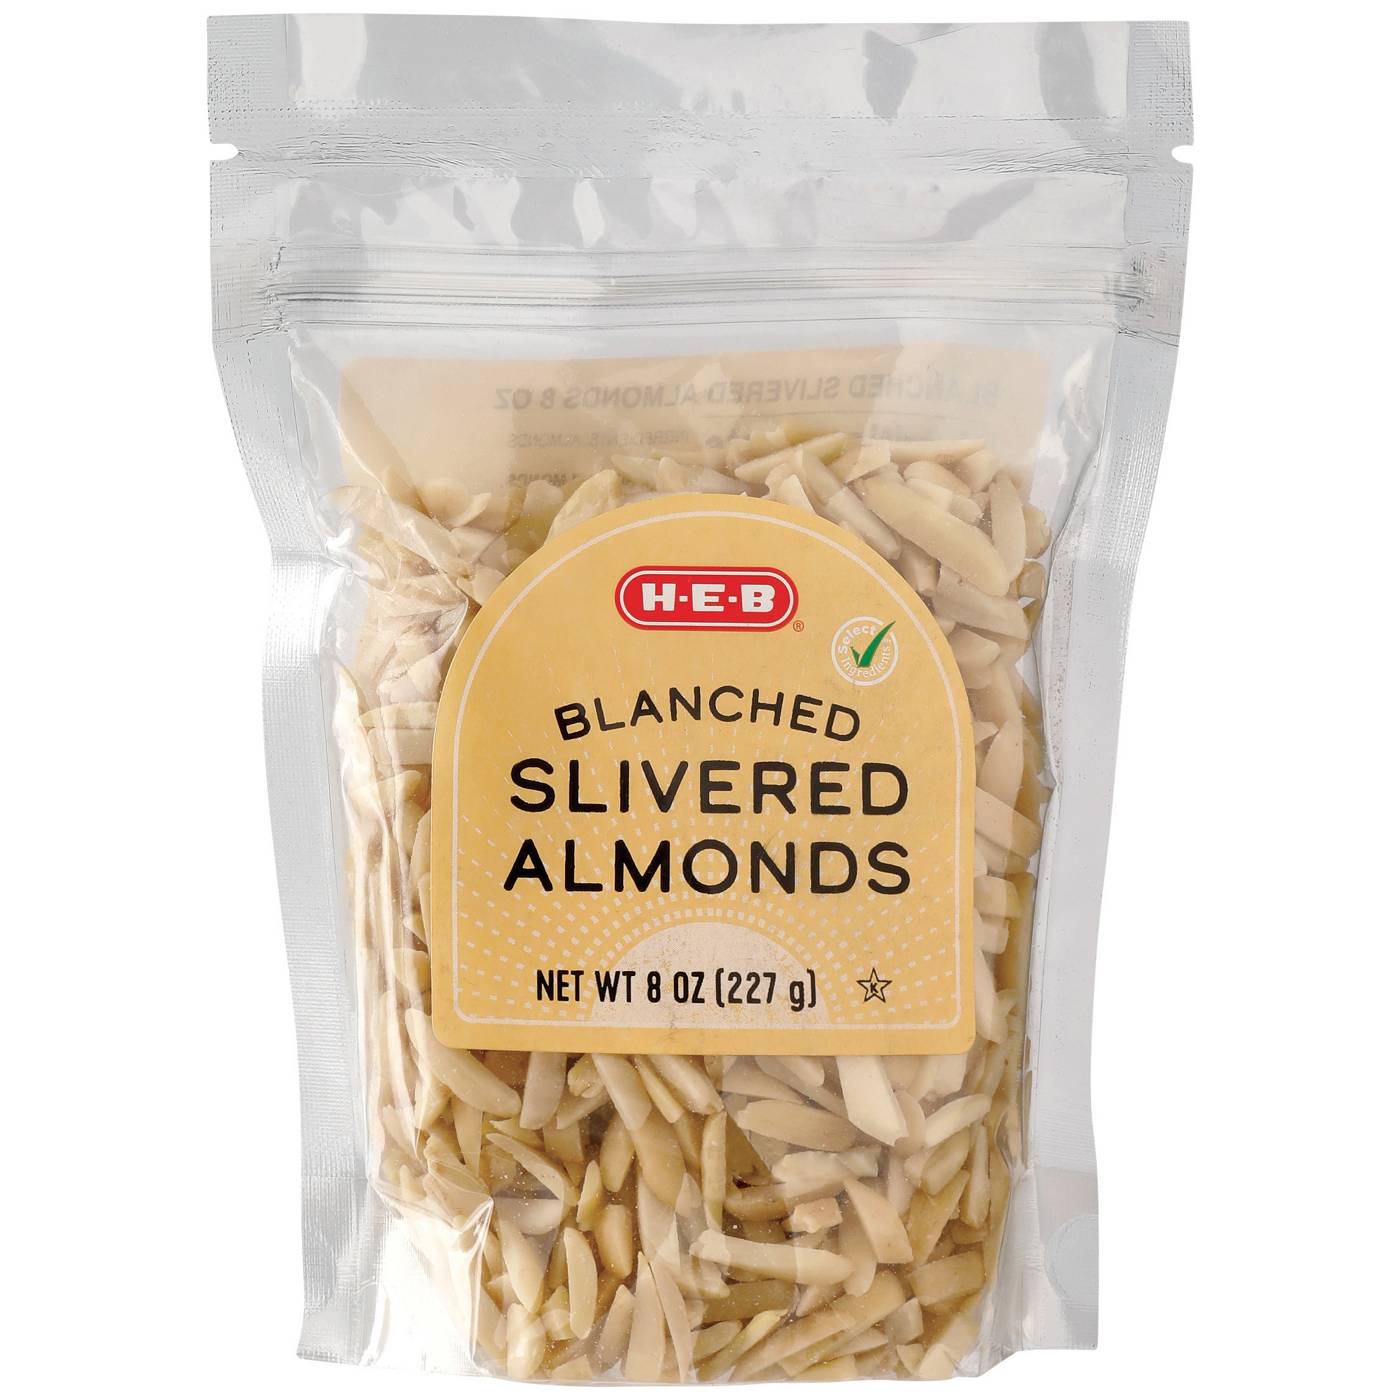 H-E-B Blanched Slivered Almonds; image 1 of 2